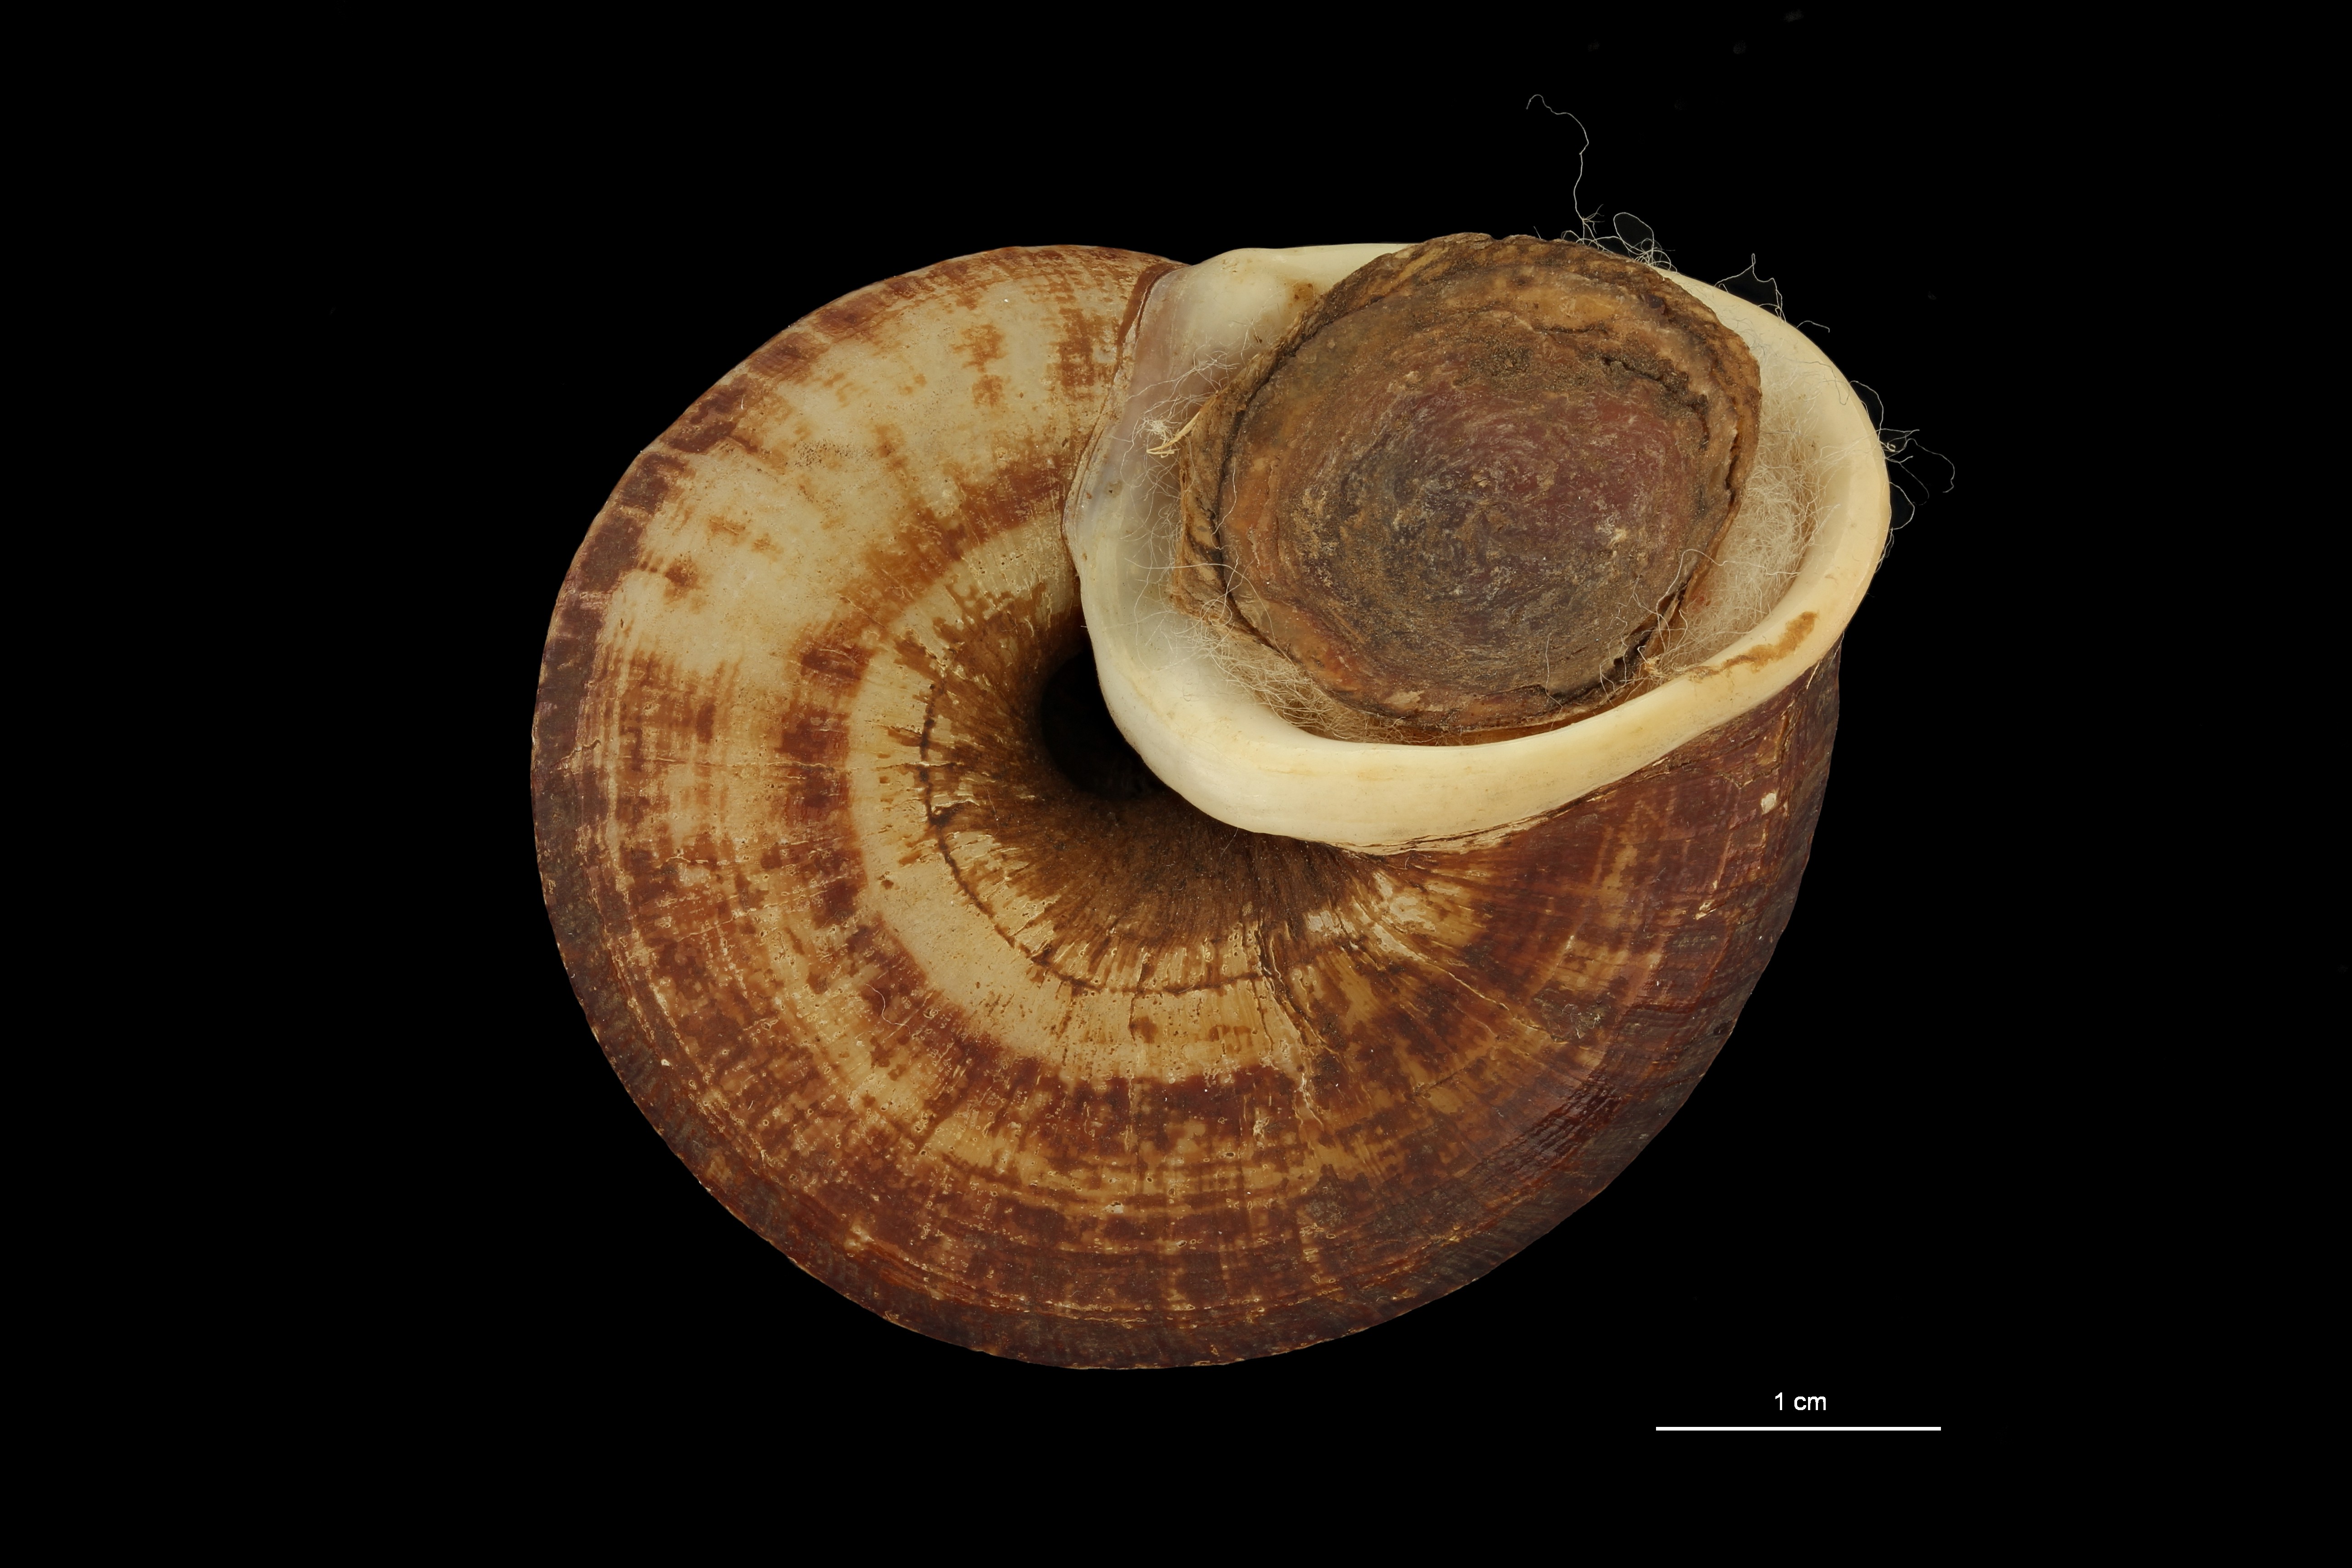 BE-RBINS-INV PARATYPE MT.921/2 Cyclophorus (Glossostylus) trouiensis var. omphalotropis VENTRAL ZS PMax Scaled.jpeg